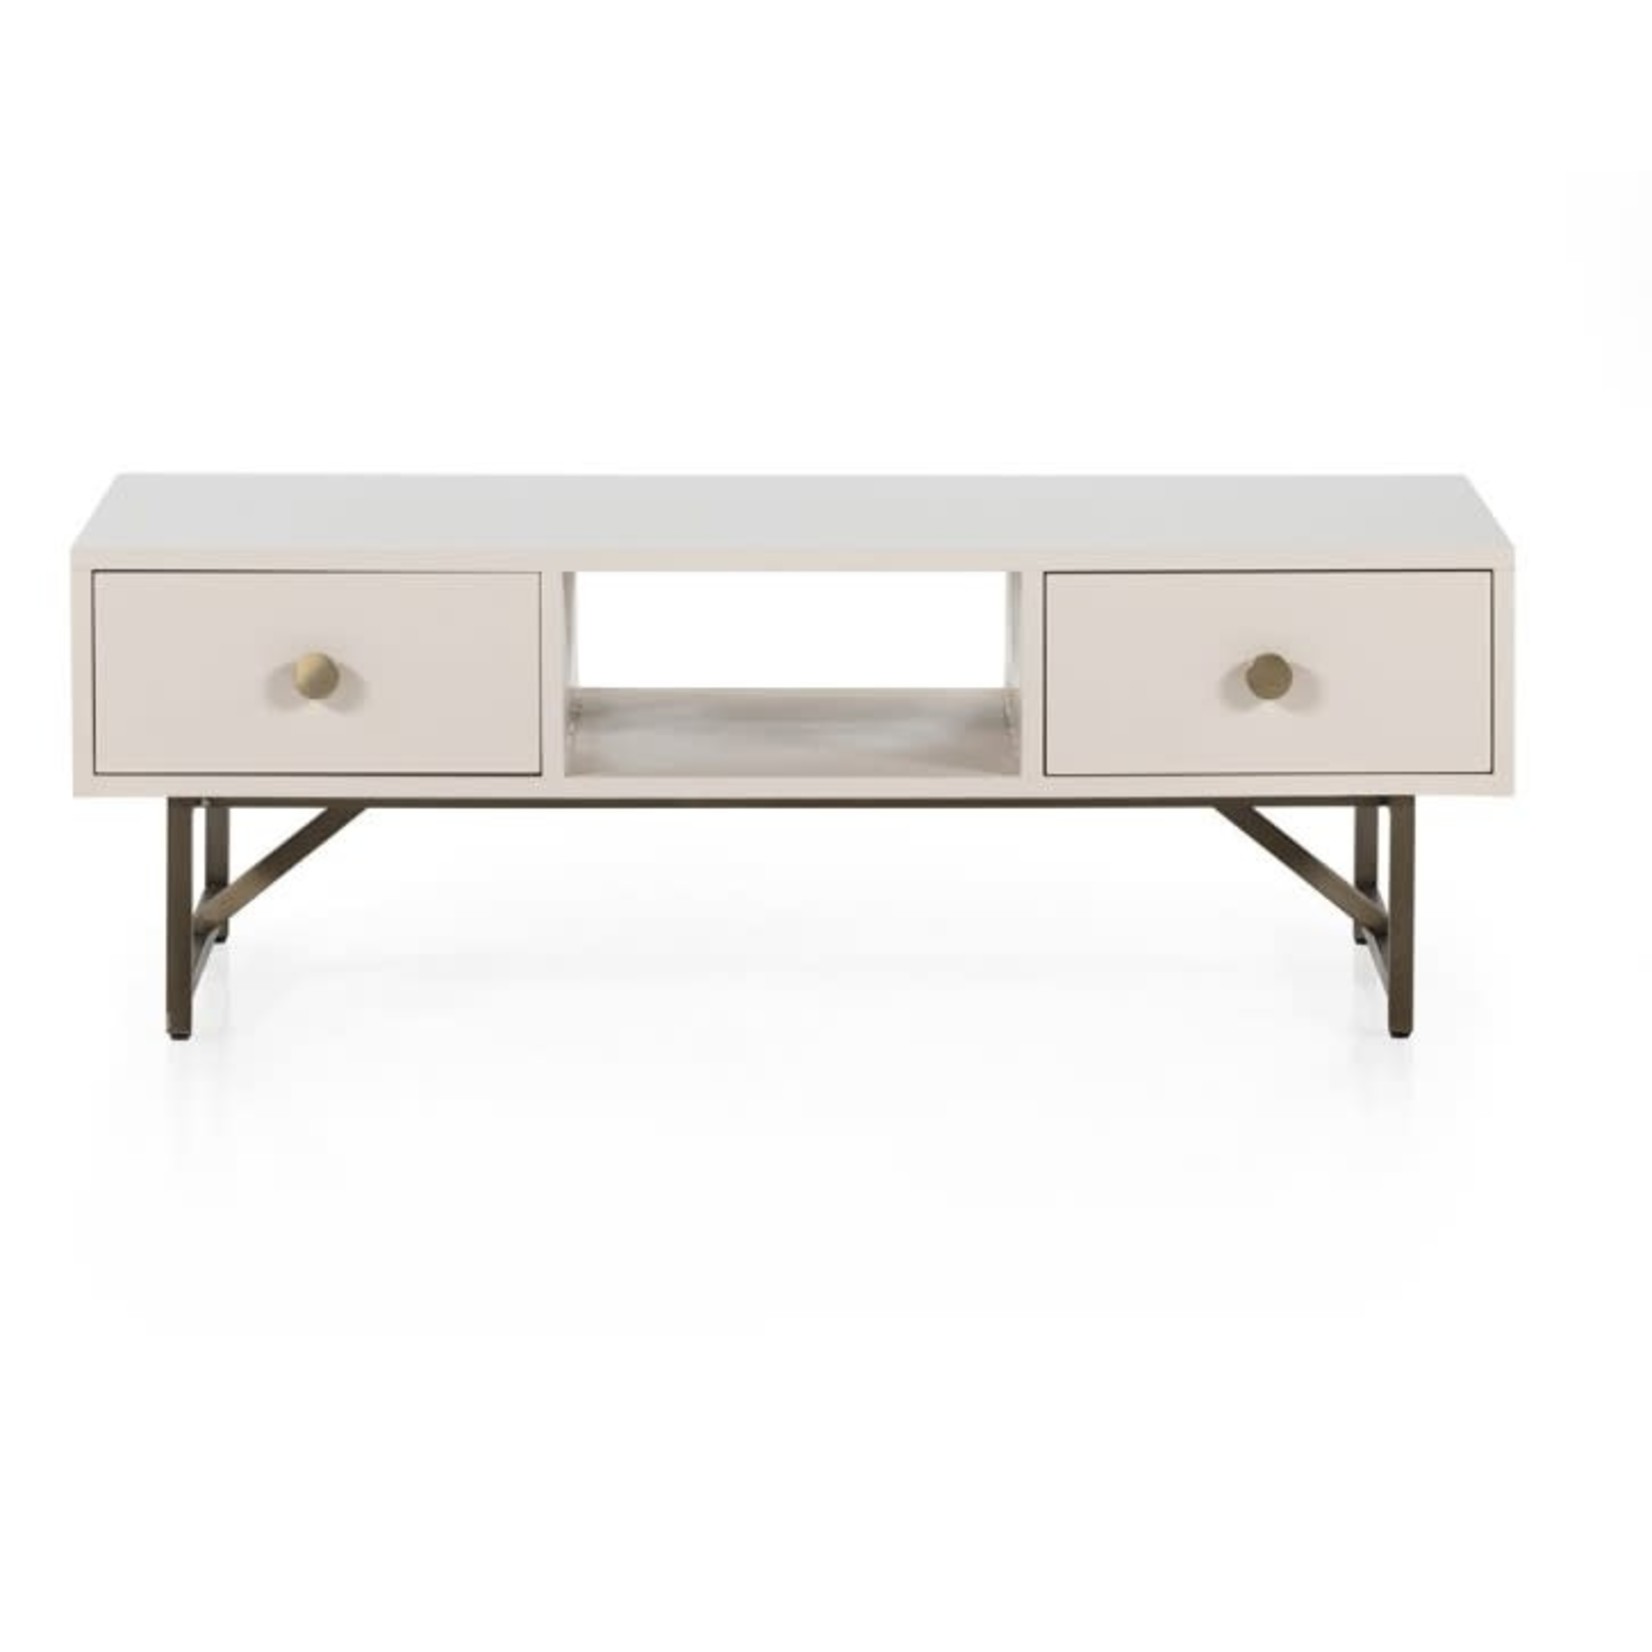 Mickler & Co. Vince Coffee Table